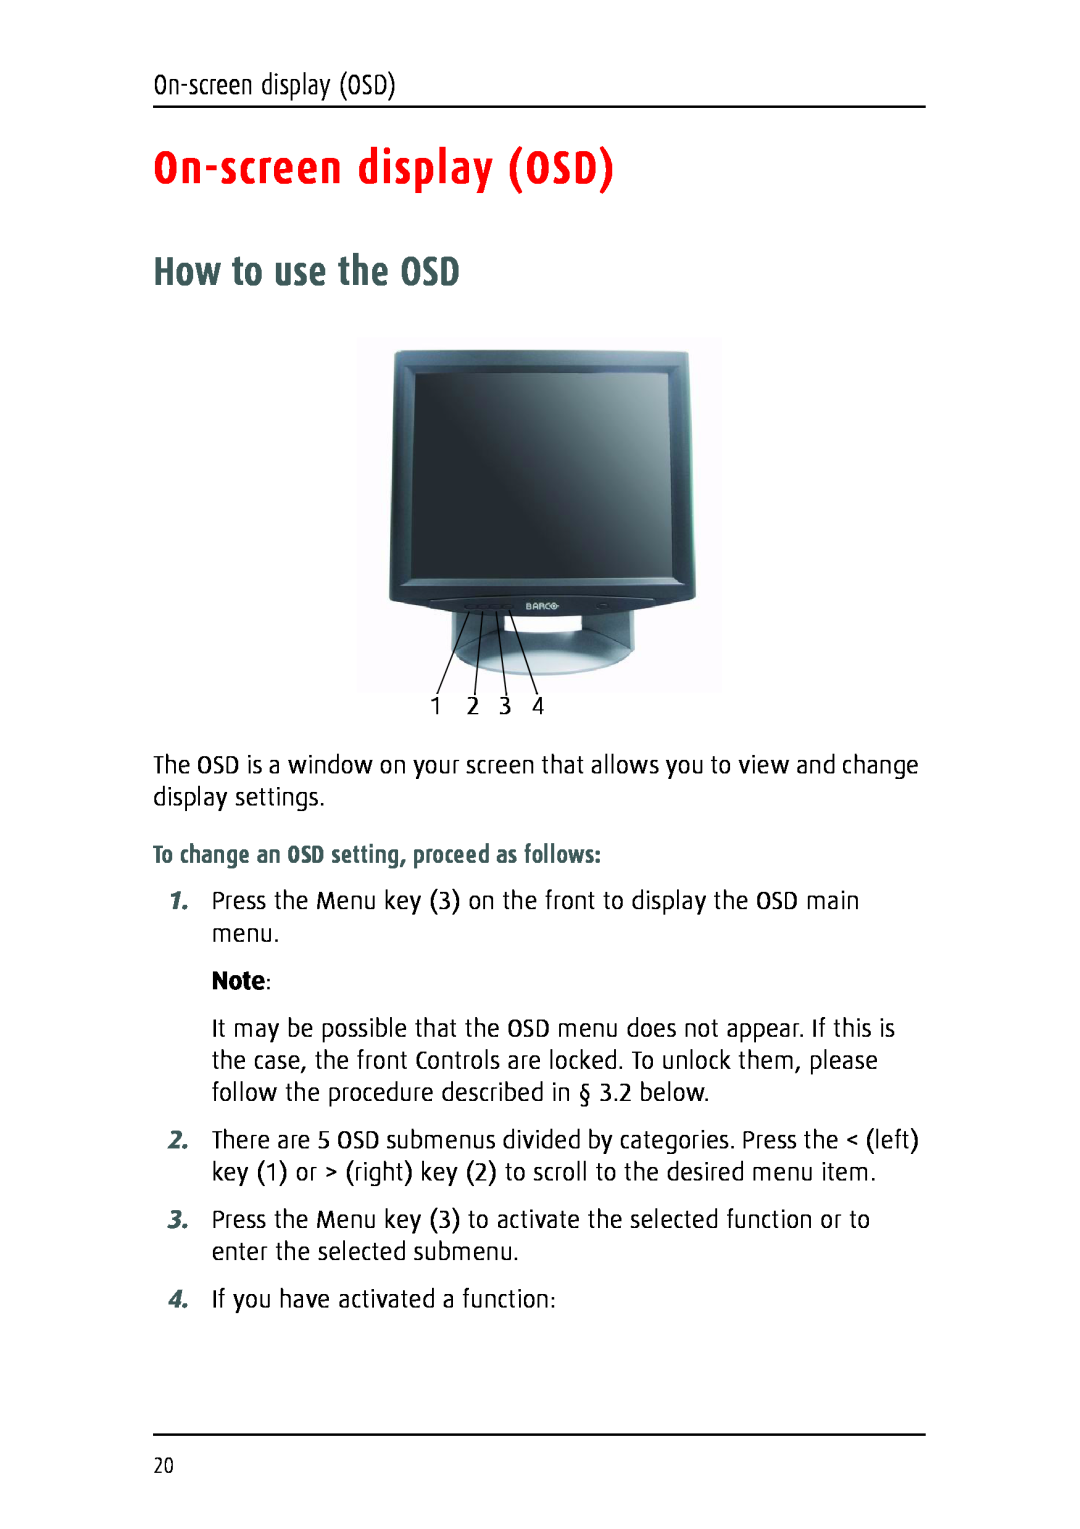 Barco 1219 user manual On-screen display OSD, How to use the OSD, To change an OSD setting, proceed as follows 